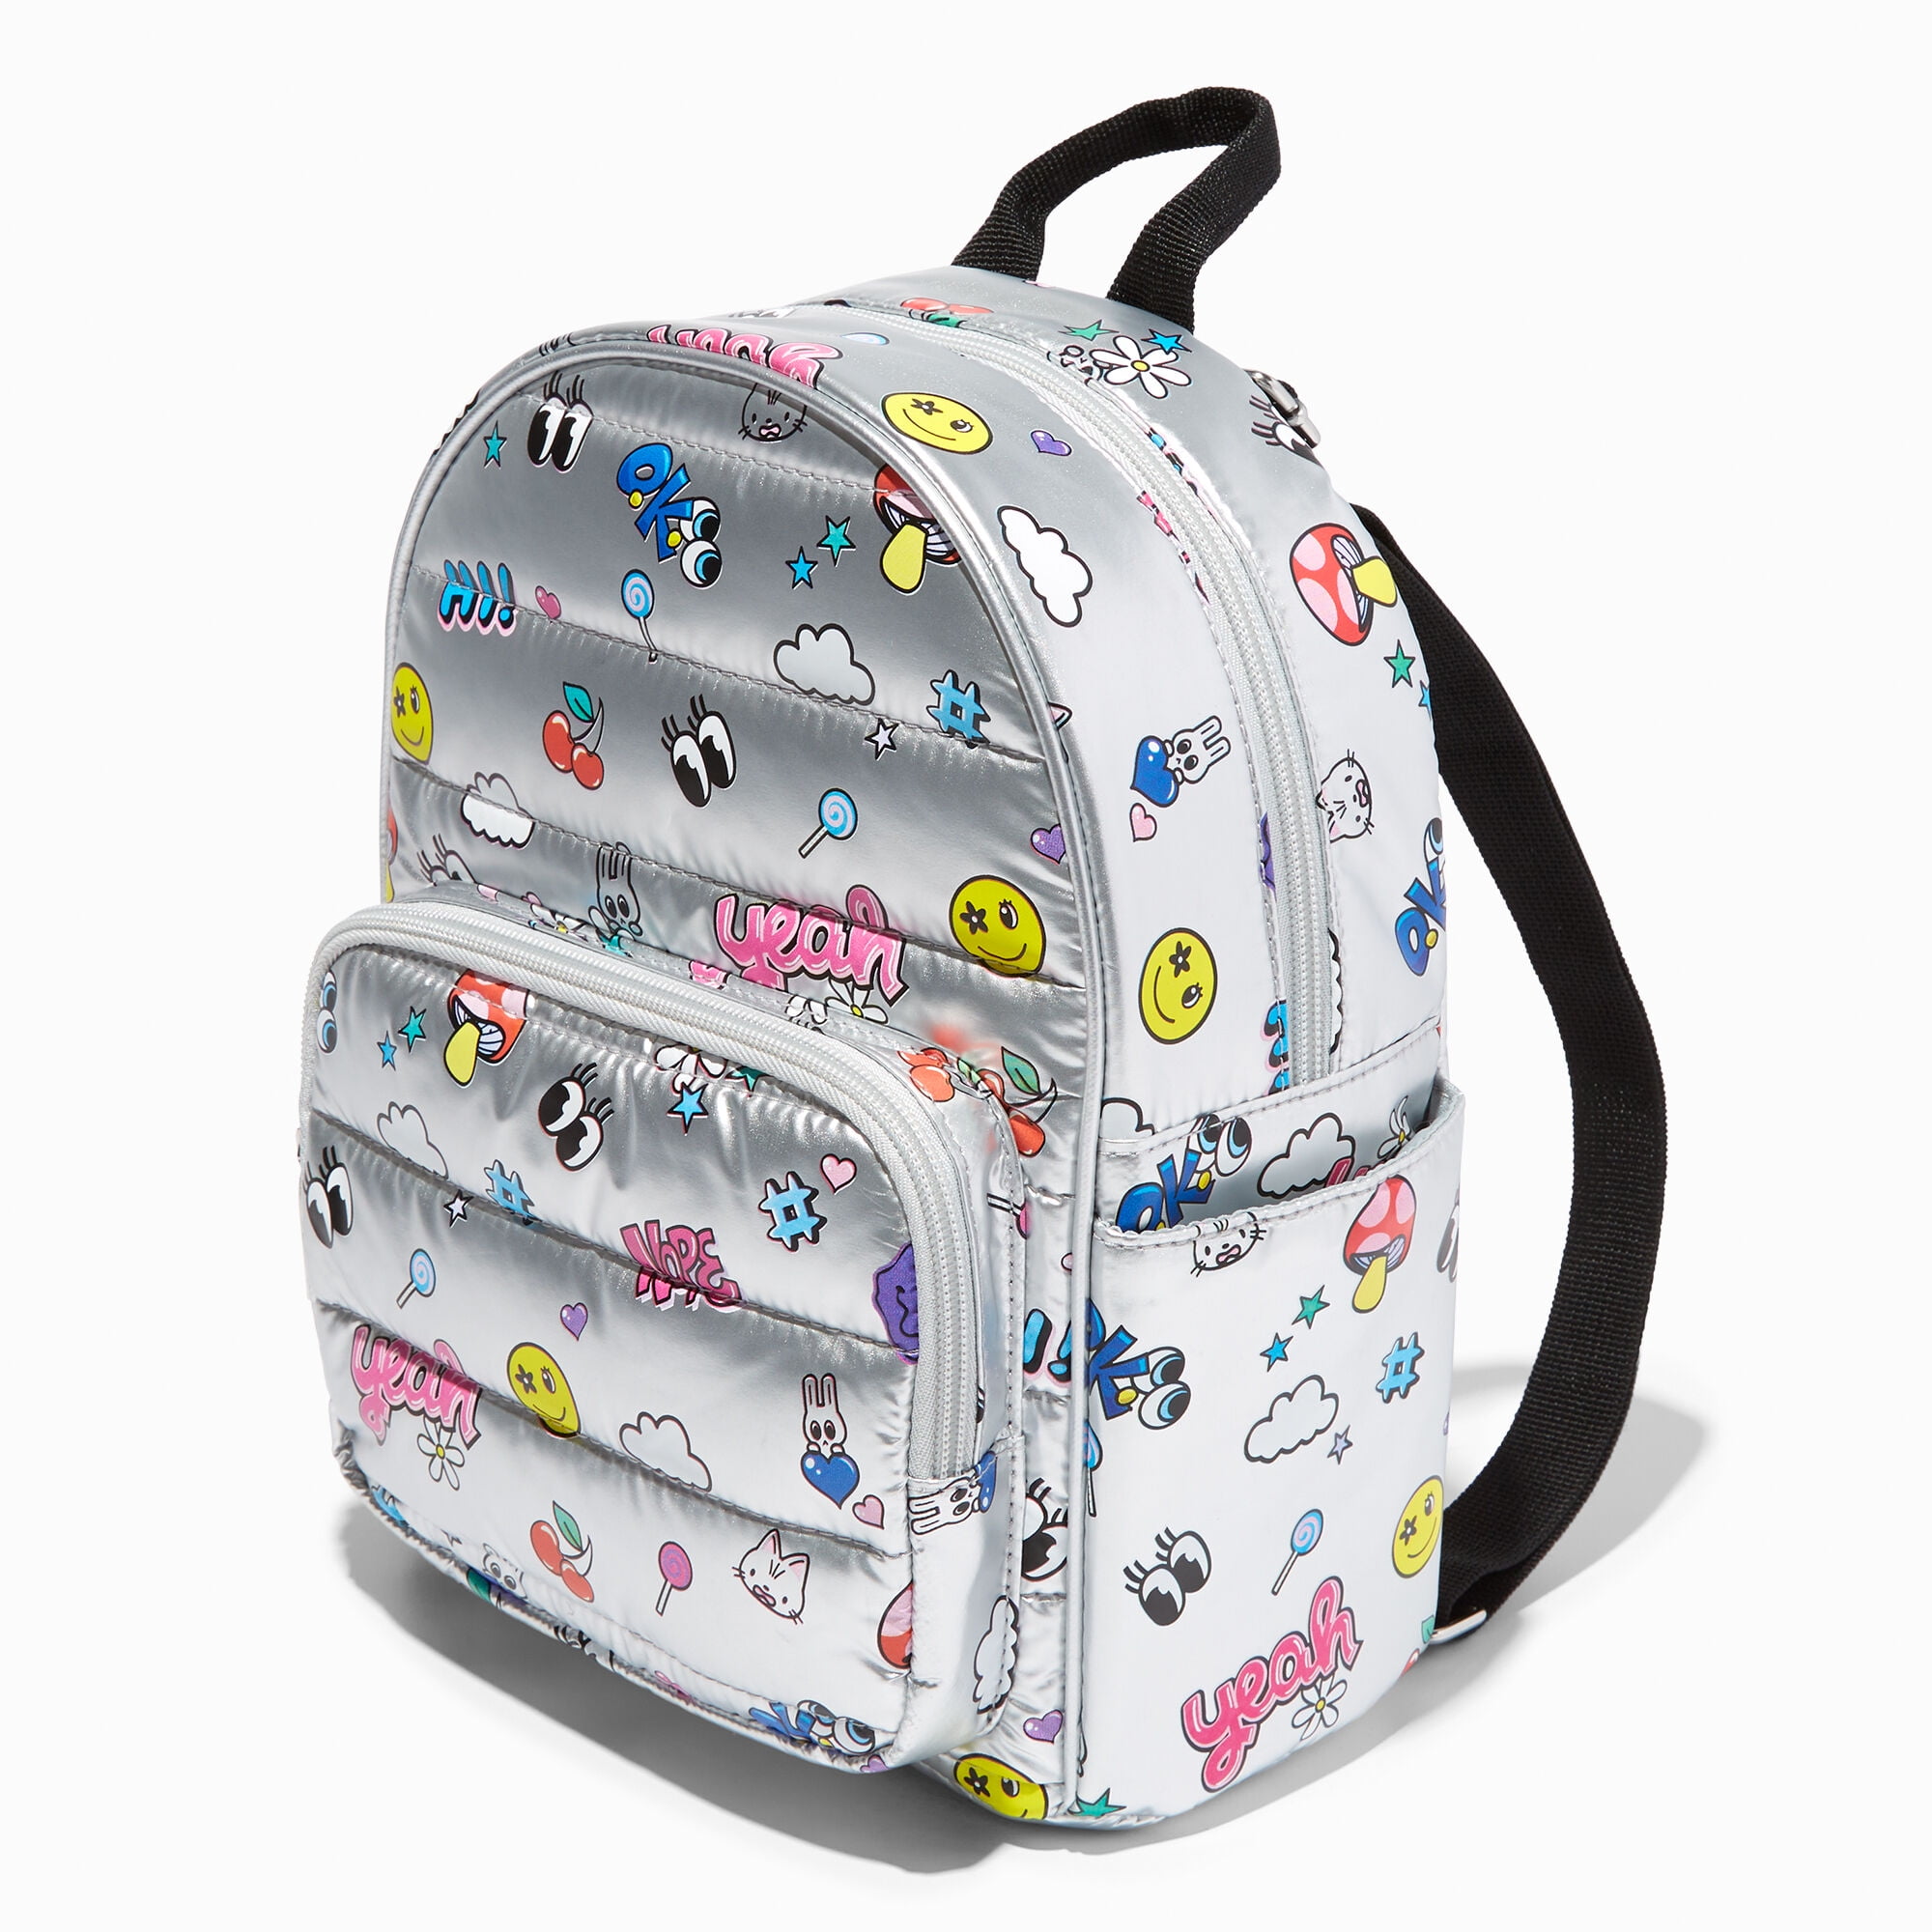 Claire s Small Backpack Girls Purse Fun Funky Fashion Accessory Mini Backpacks Kids Little Girl Tweens Teens Silver Y2K Icons Nylon 9x12x4 3bcbb6f6 9b28 438c af61 d8e2334d63f2.e969ea4c954d6cc955eee0f1834df020